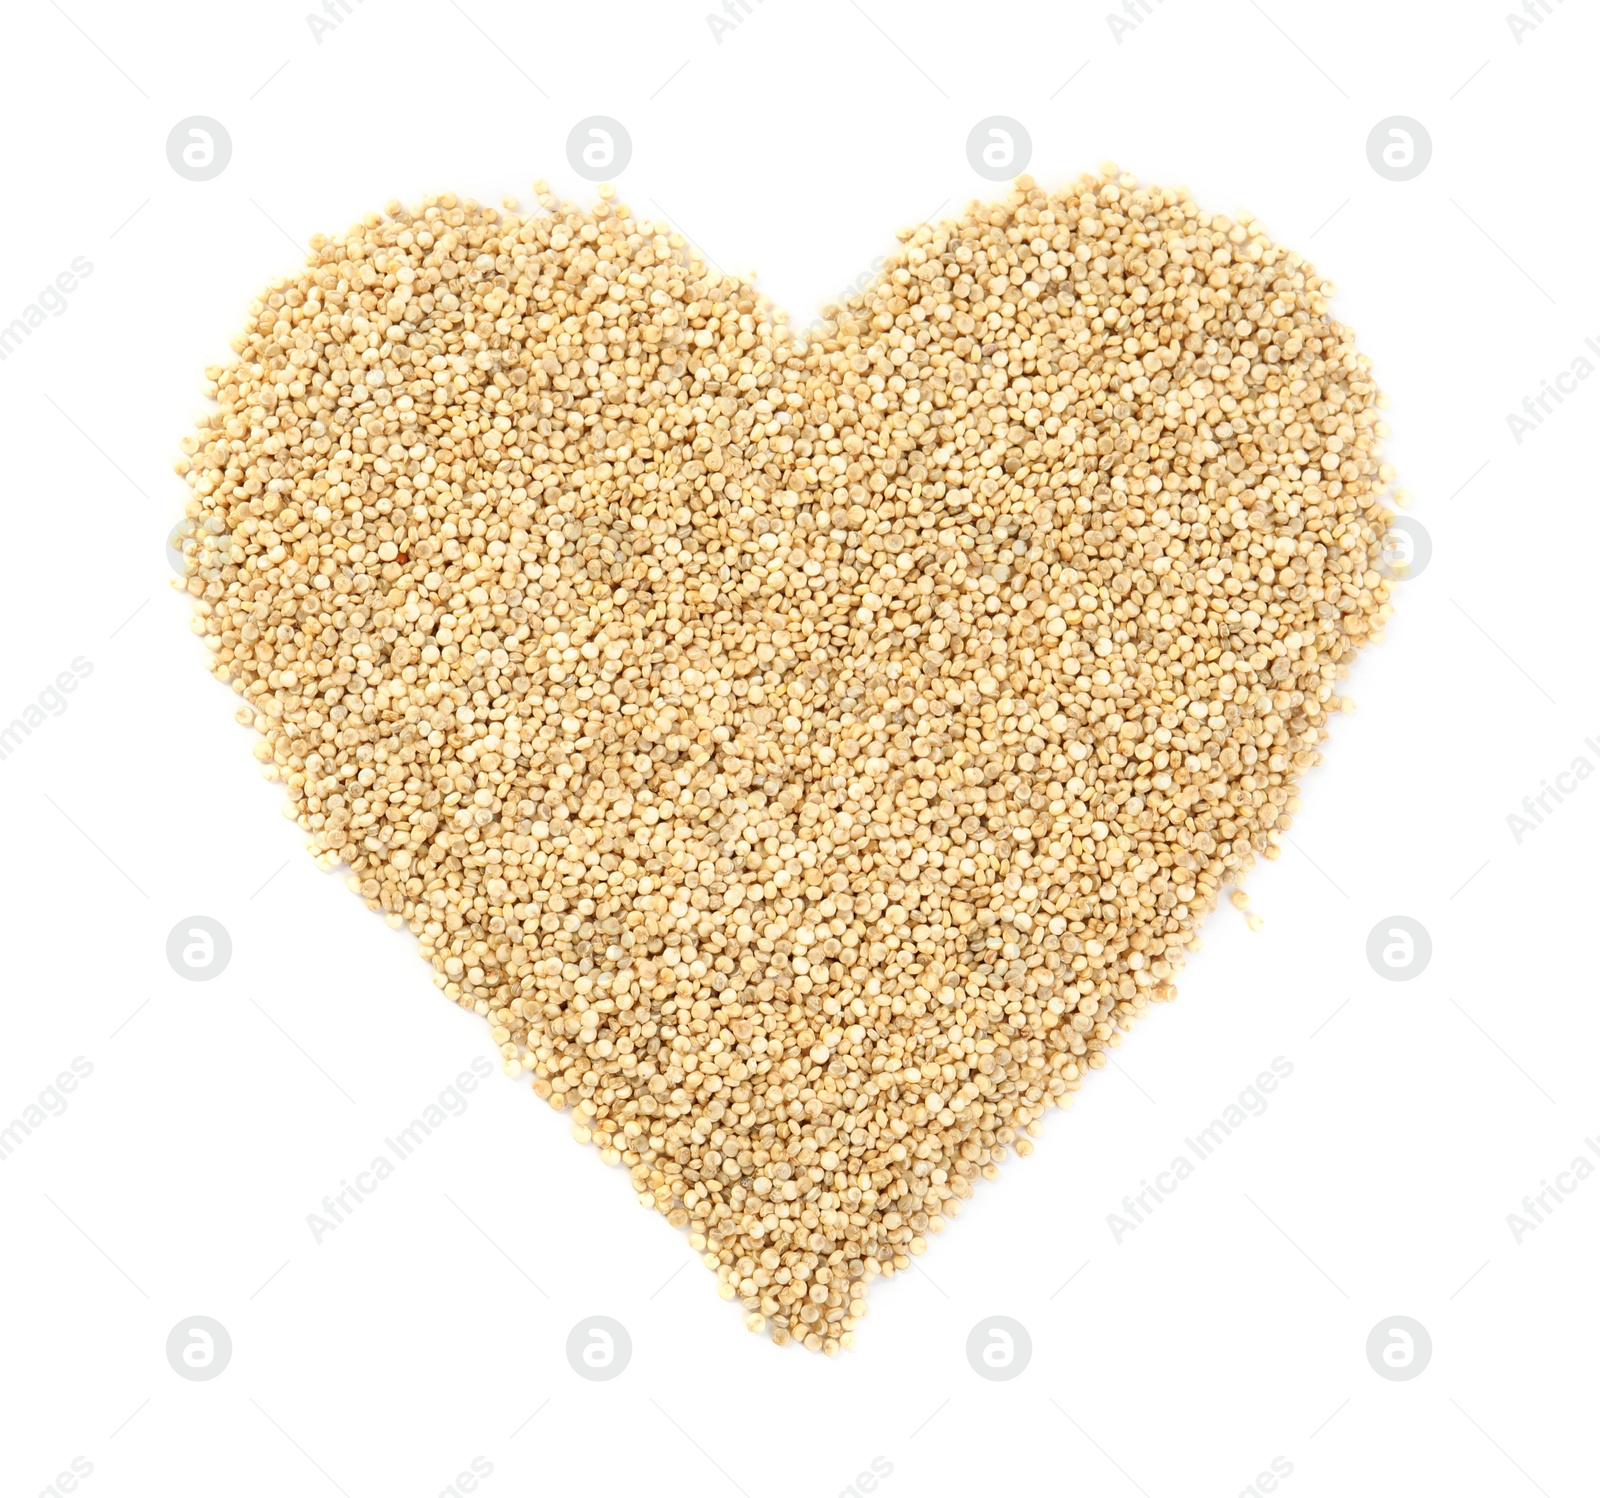 Photo of Heart made of quinoa on white background, top view